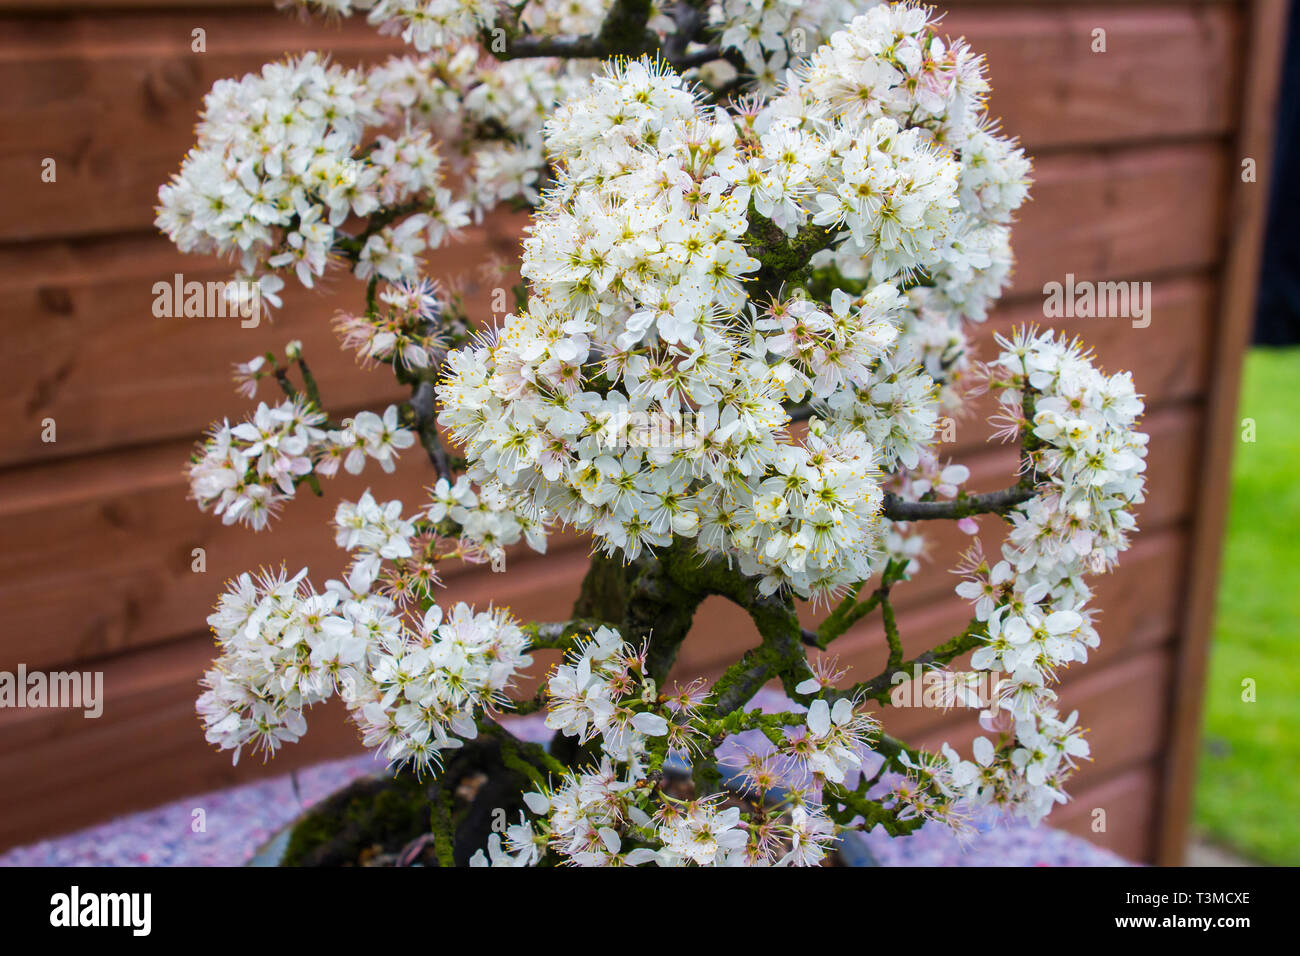 Detail of a beautiful blackthorn bonsai cultivated by a bonsai enthusiast in Northern Ireland in spring flower Stock Photo